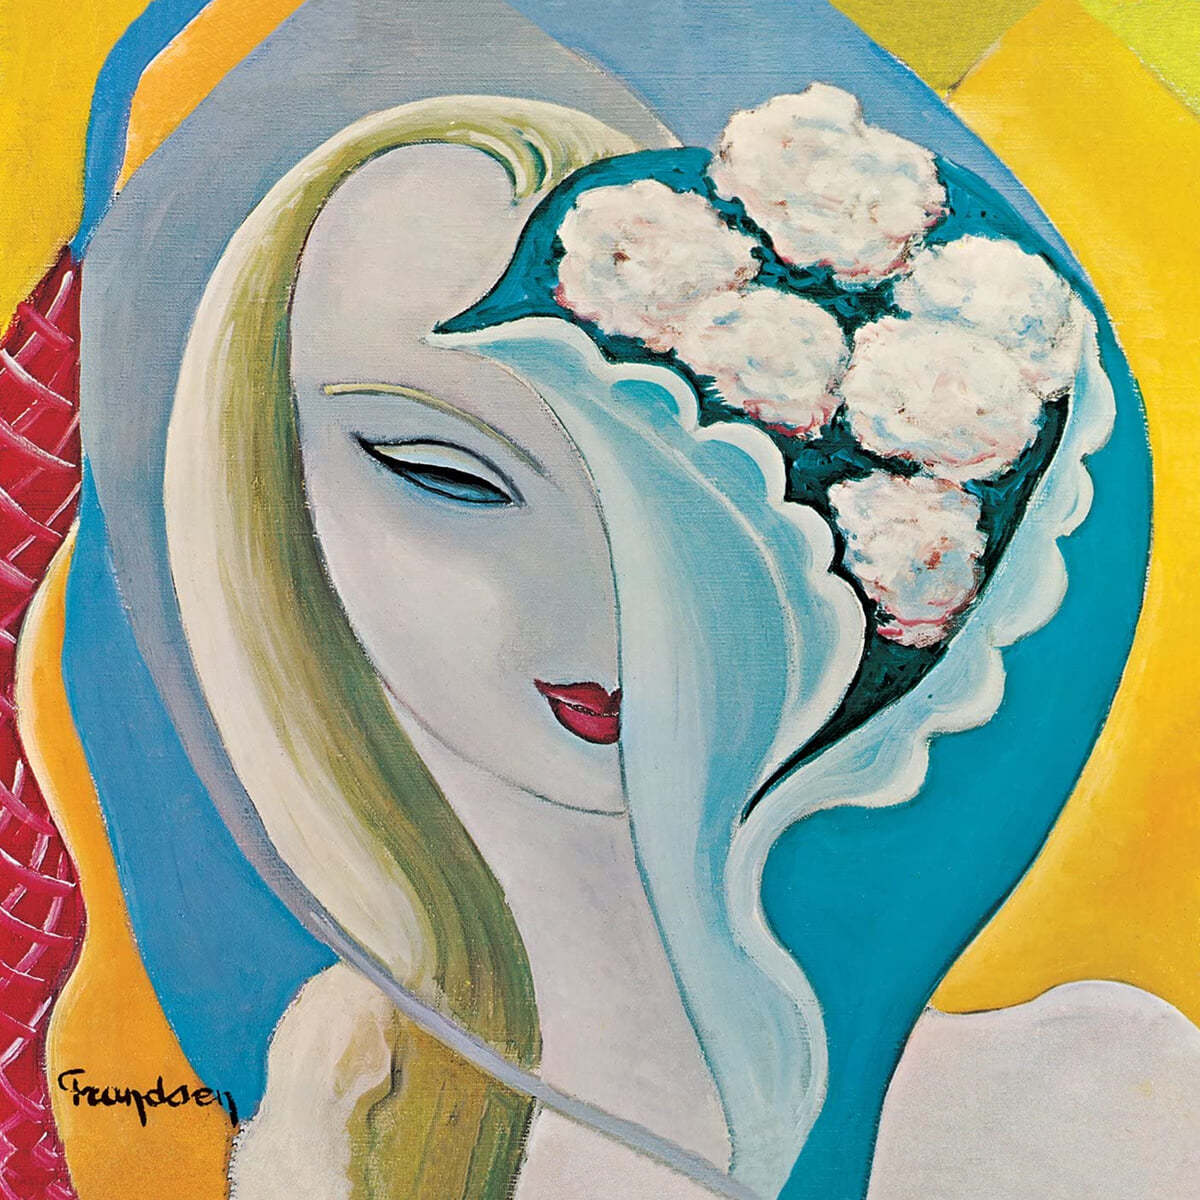 Derek &amp; The Dominos - Layla &amp; The Other Assorted Love Songs [2LP] 